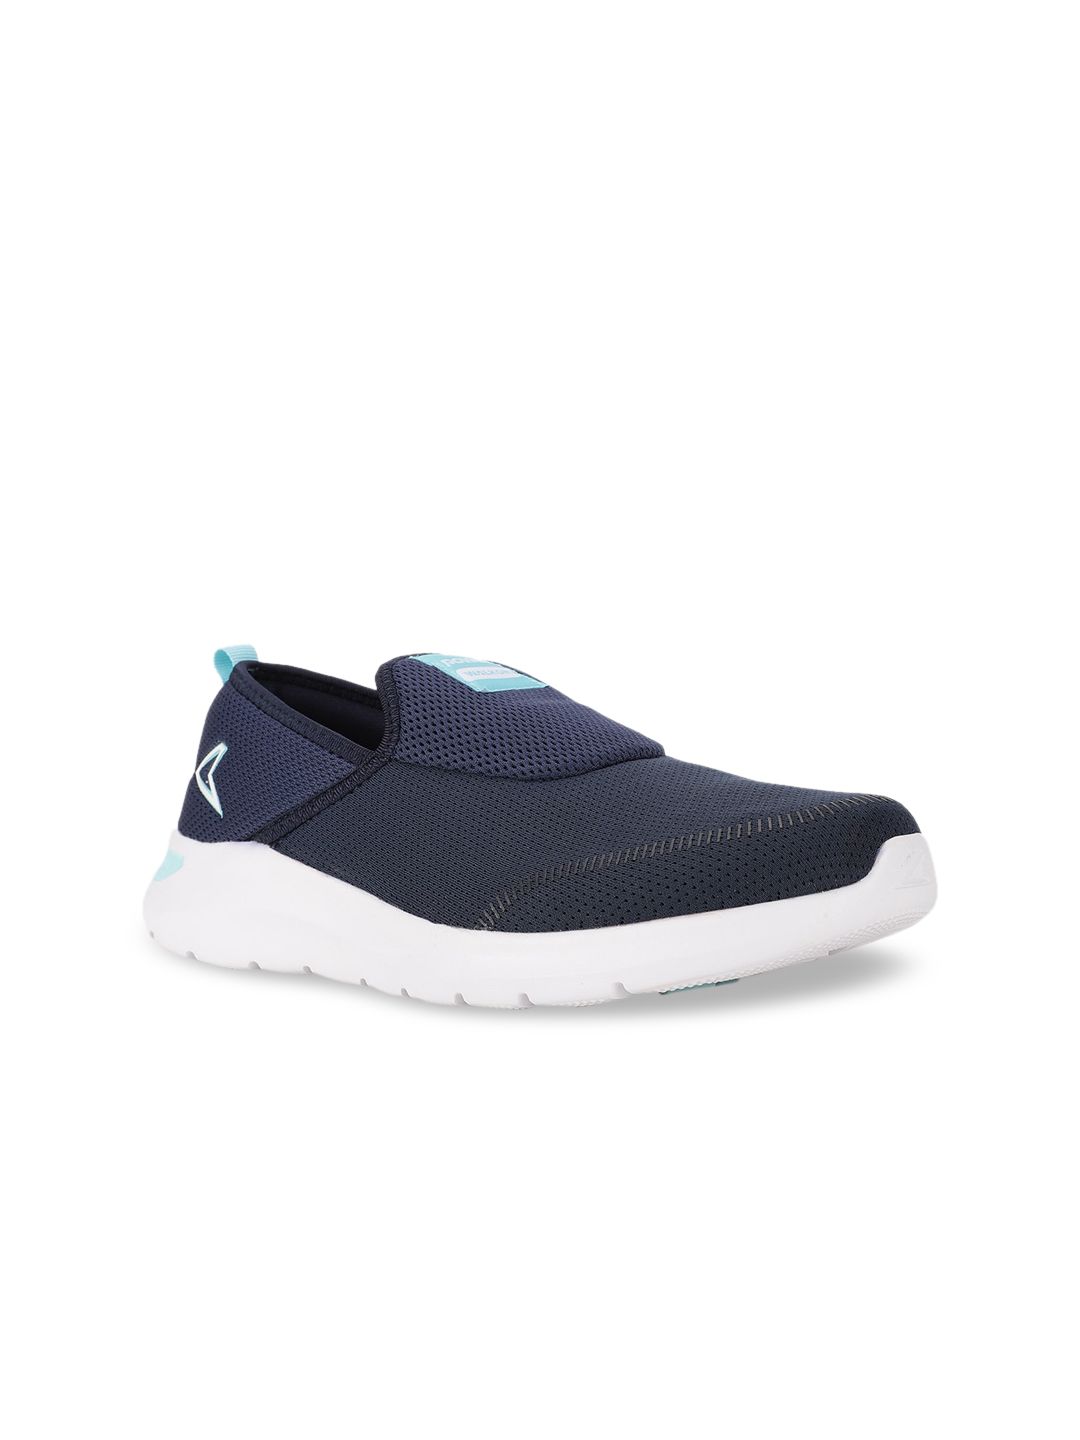 Power Women Blue Woven Design Slip-On Sneakers Price in India